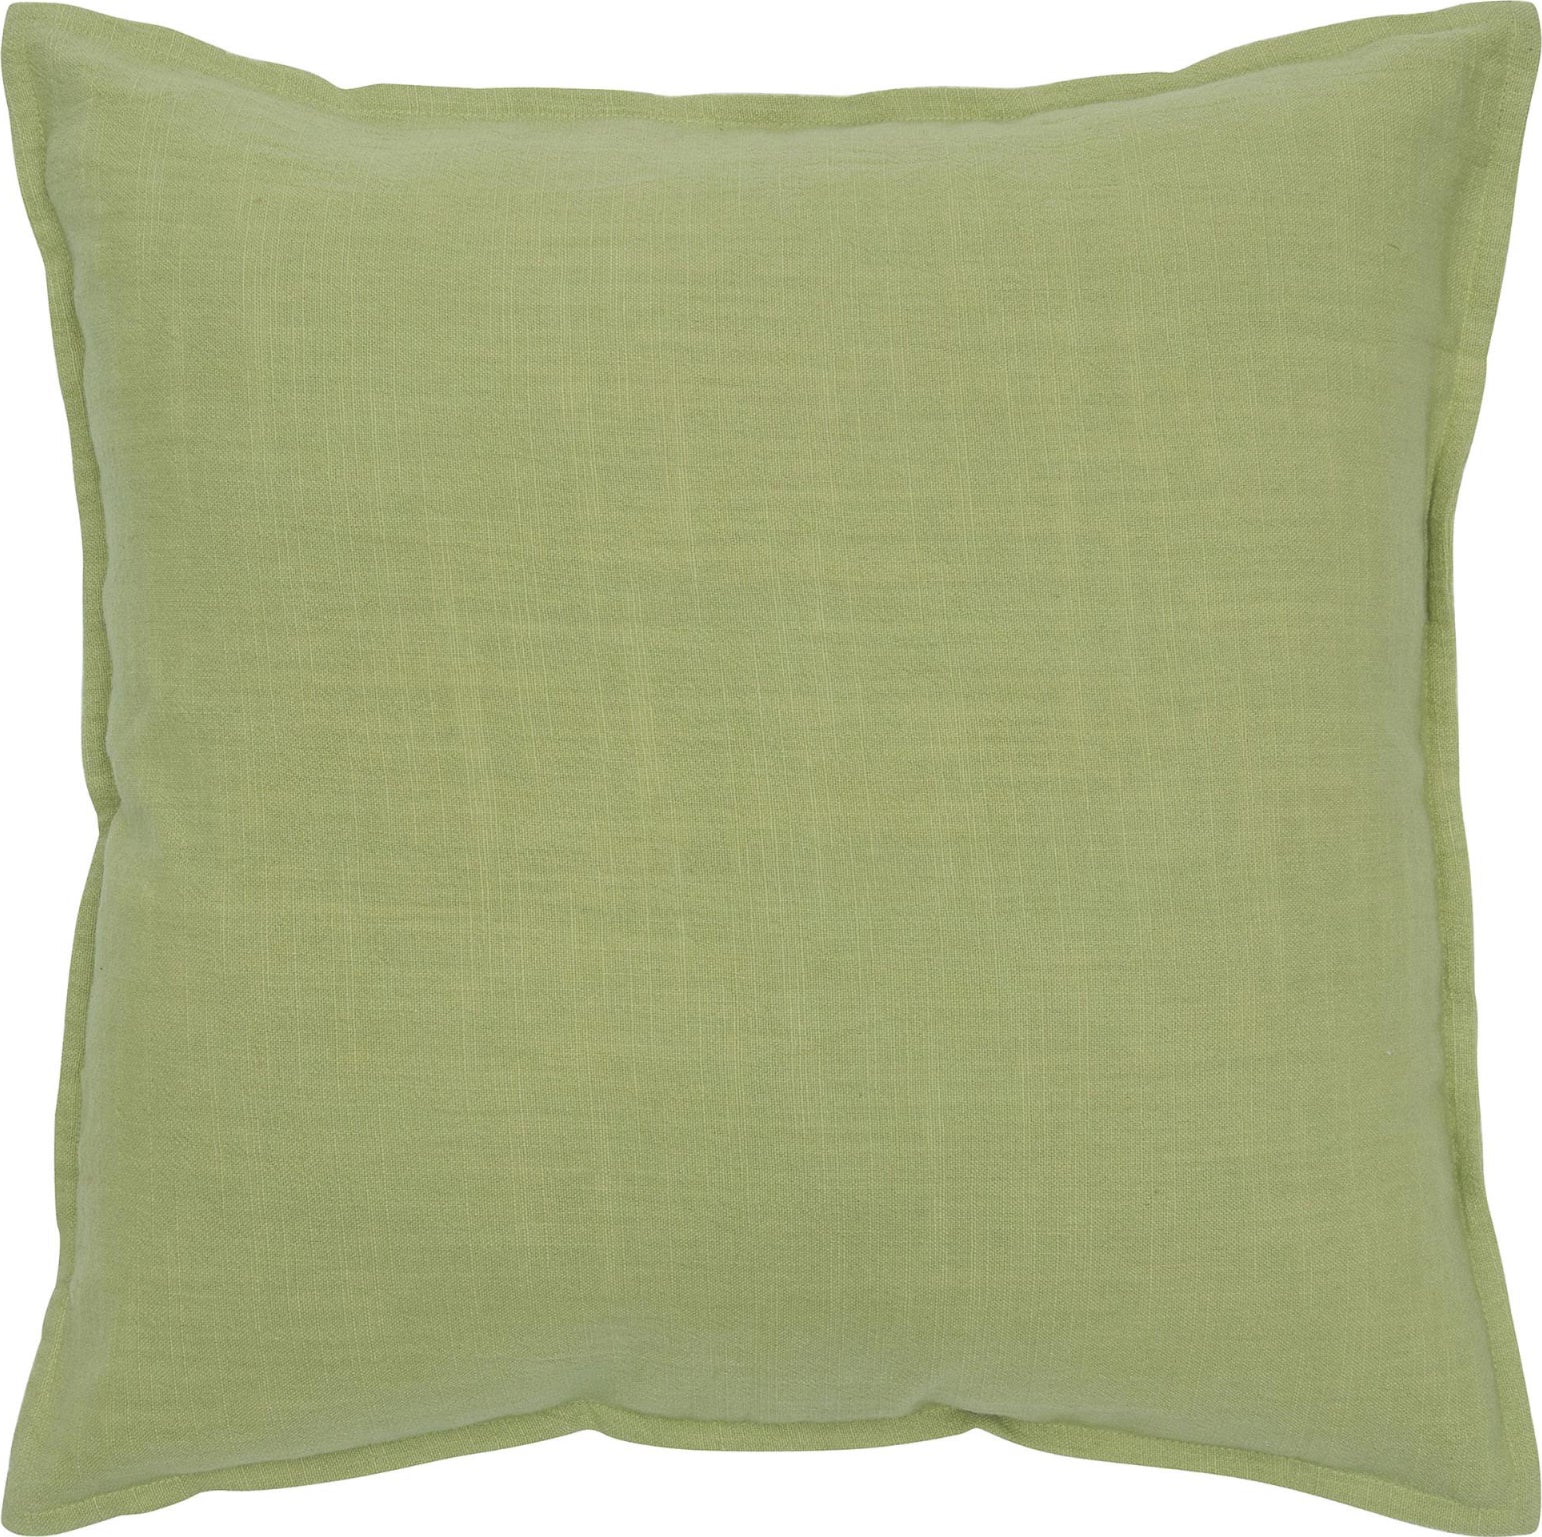 Rizzy Pillows T05679 Lime green